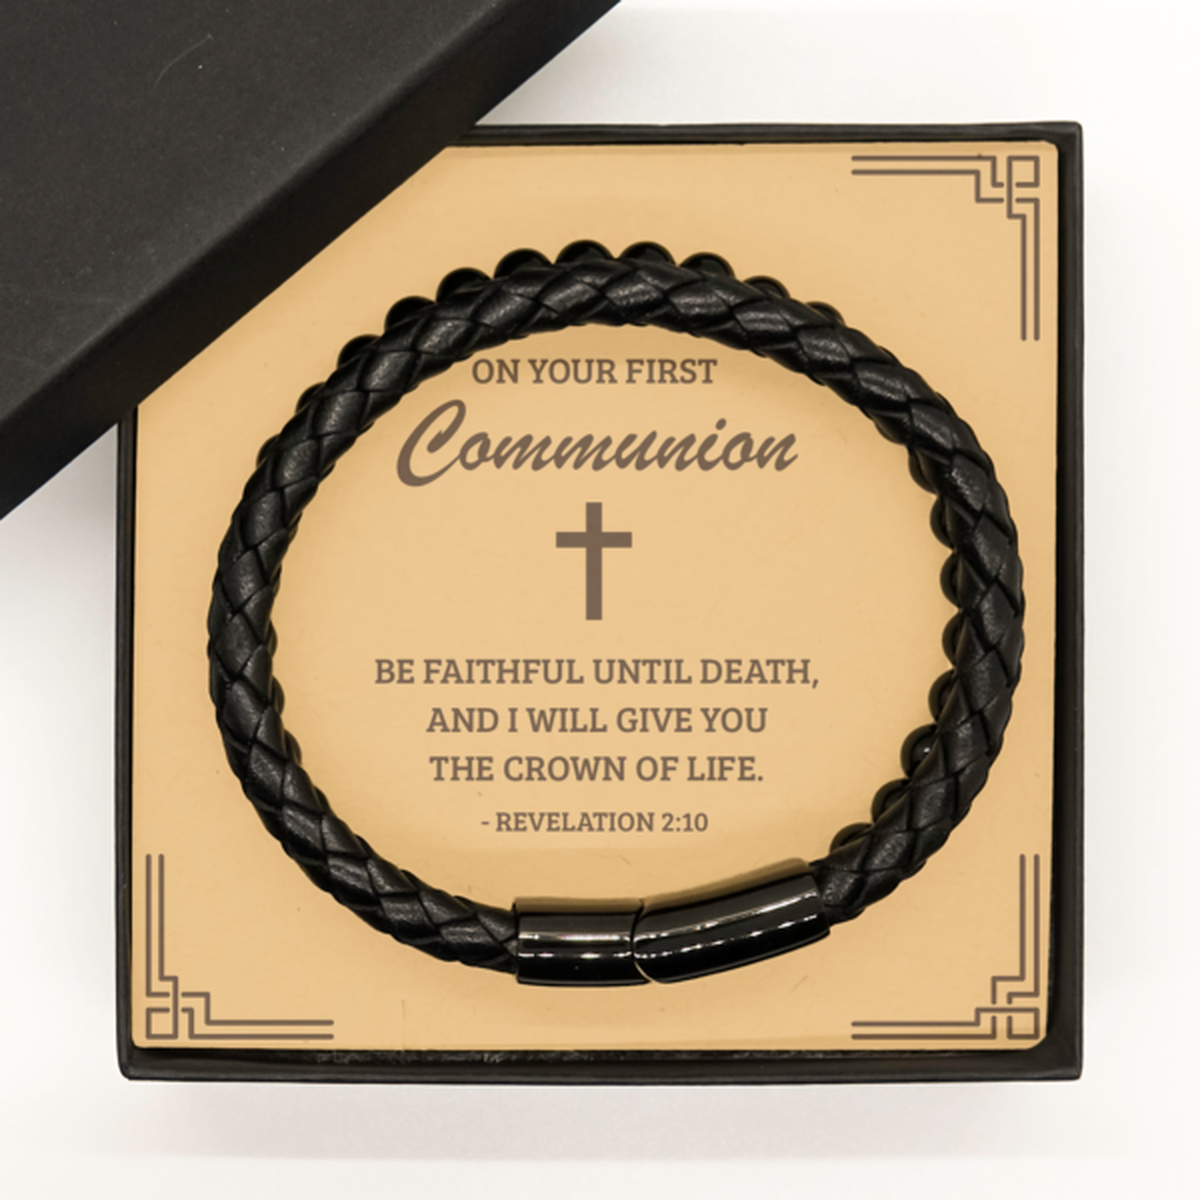 First Communion Gifts for Teenage Boys, Be faithful until death, Stone Leather Bracelet with Bible Verse Message Card, Religious Catholic Bracelet for Son, Grandson, Dad, Godfather